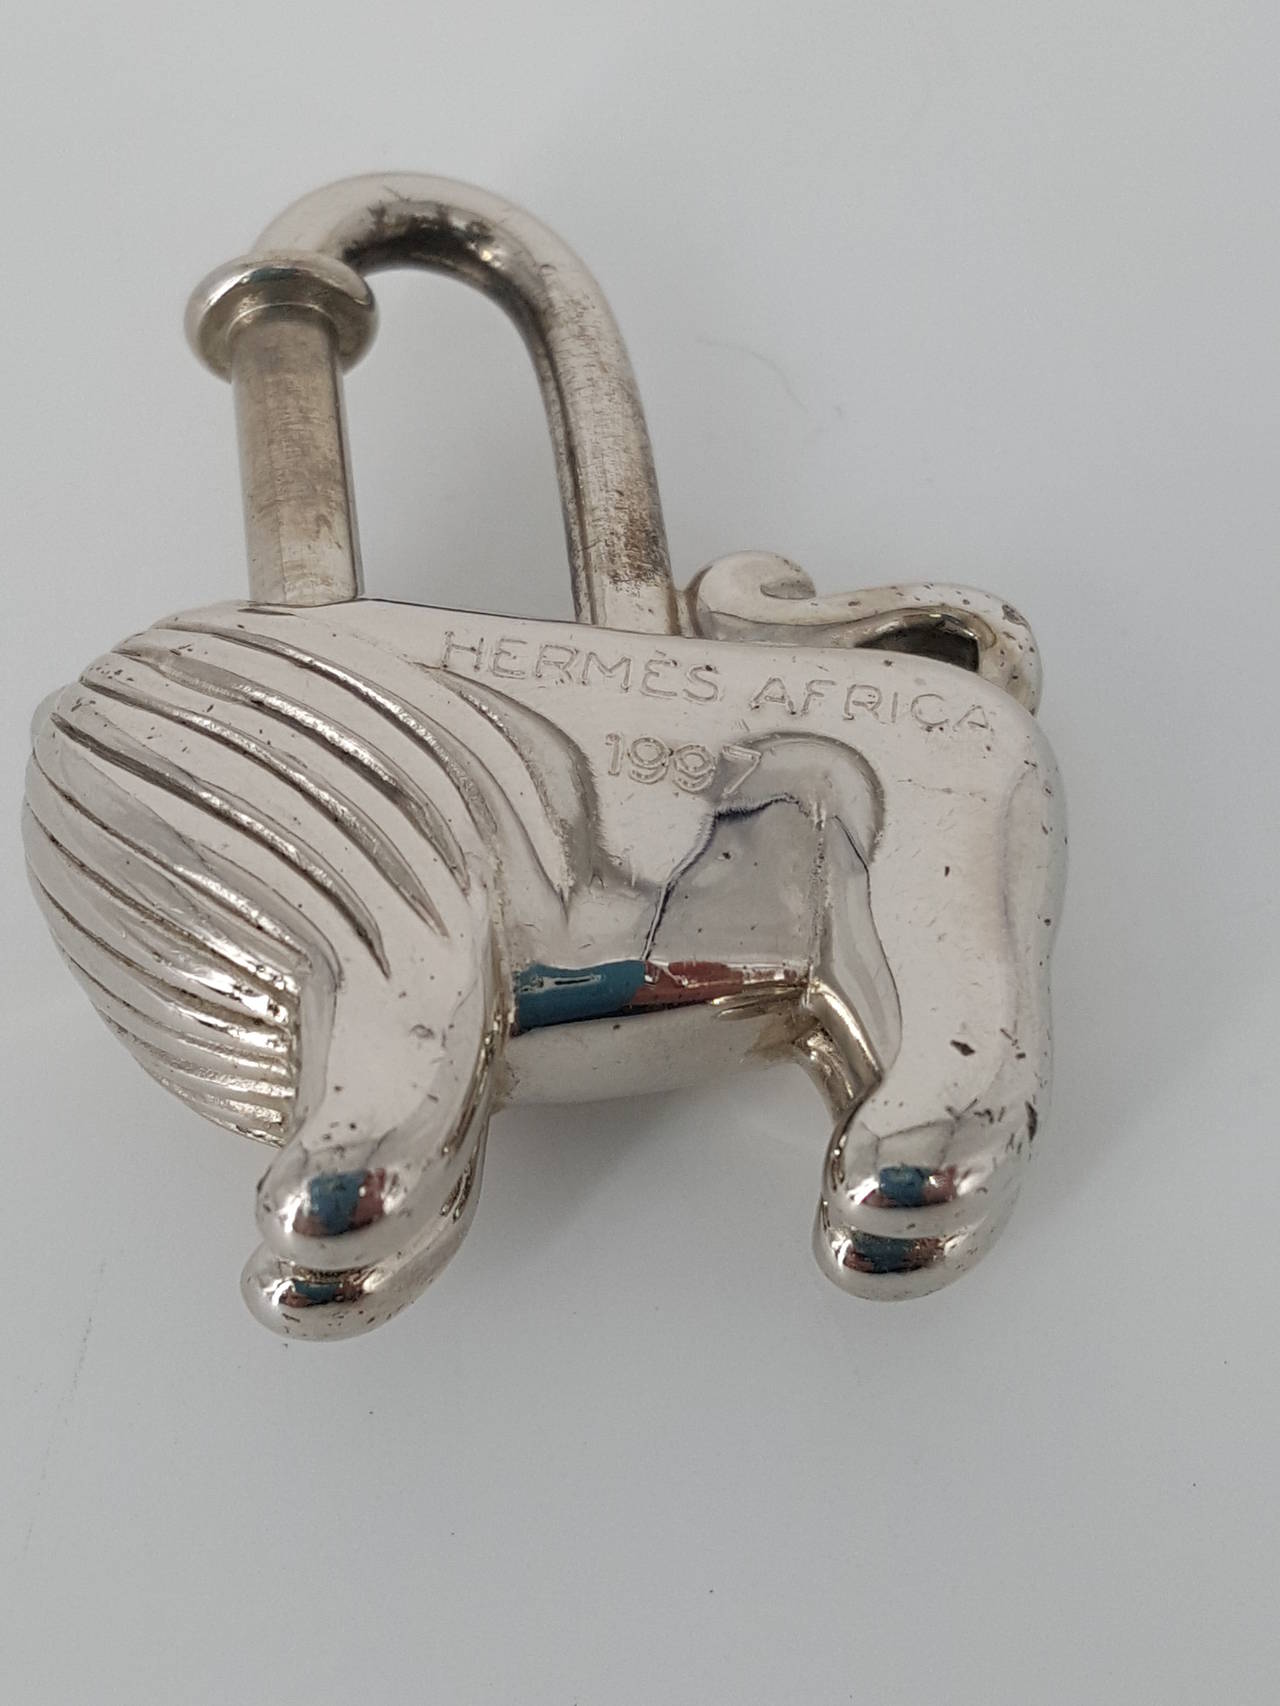 Offered for sale is this Hermes Cadena in a lion motif in palladium finish from 1997.